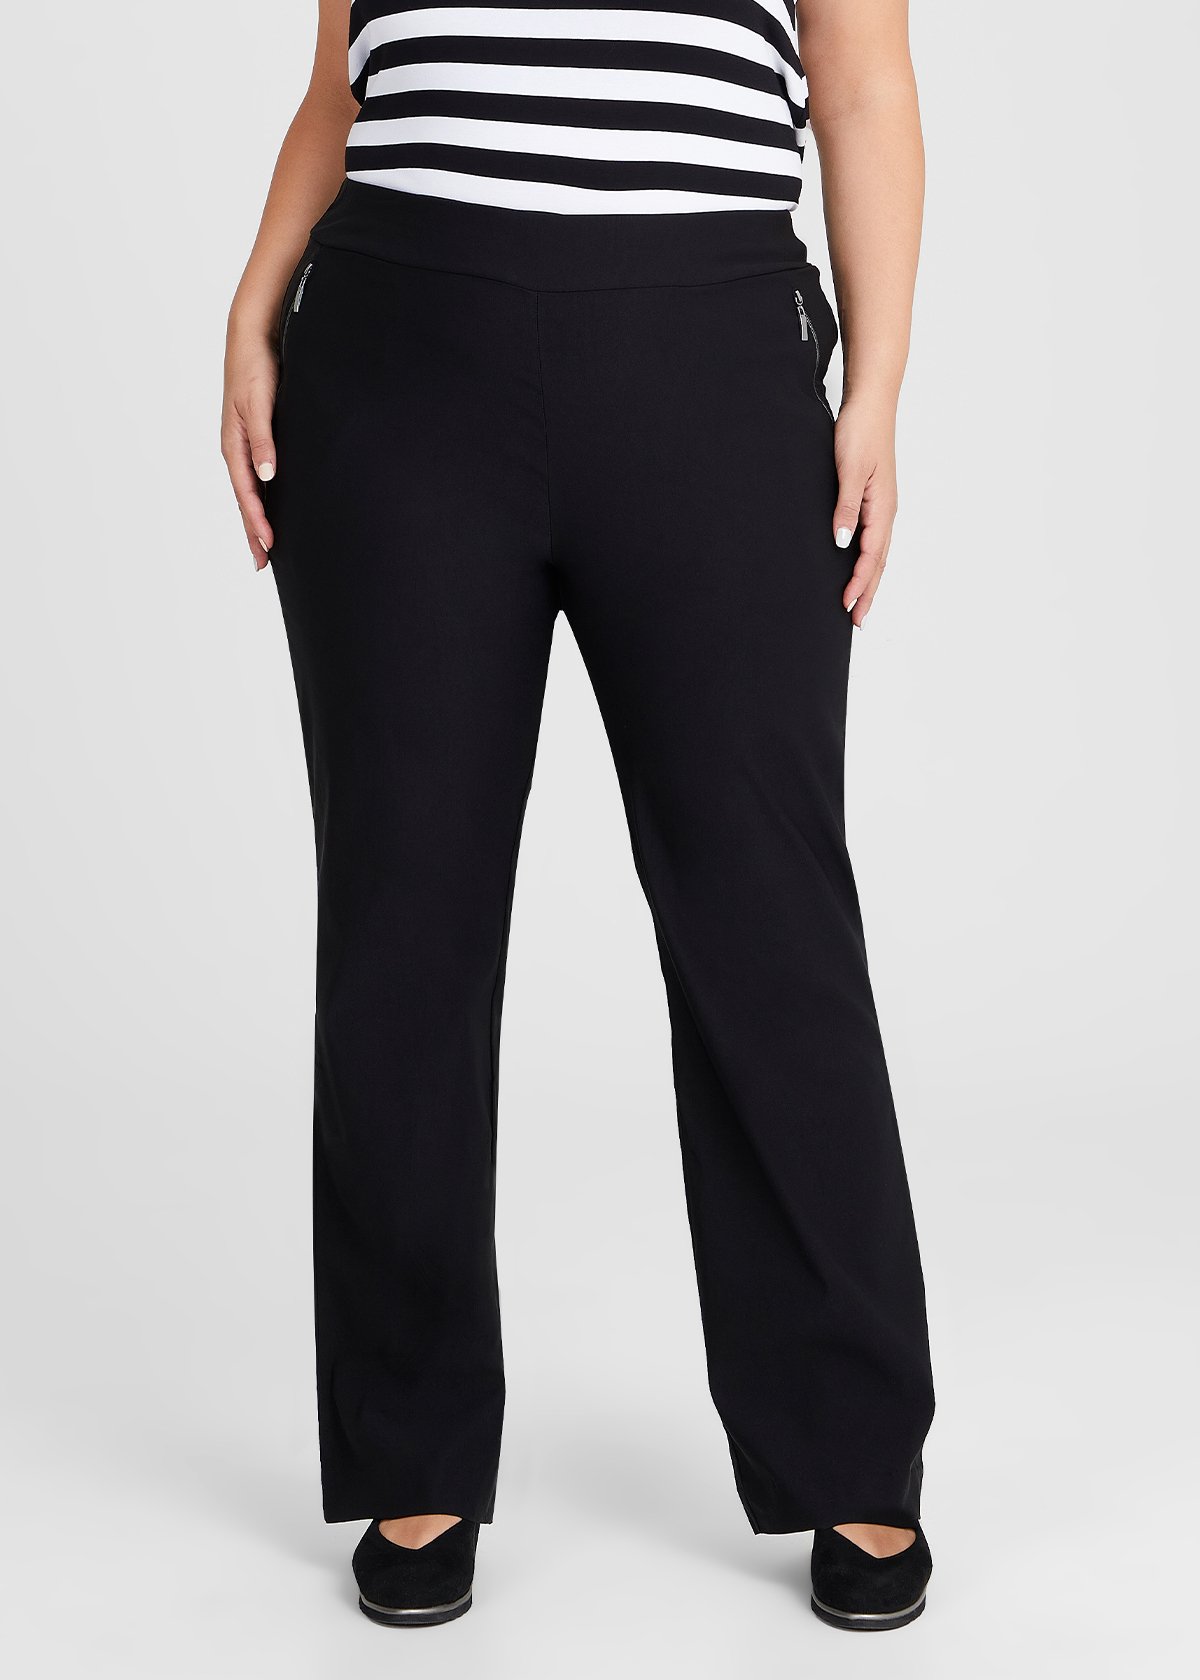 Shop Plus Size Tall Lexi Essential Work Pant in Black | Sizes 12-30 ...